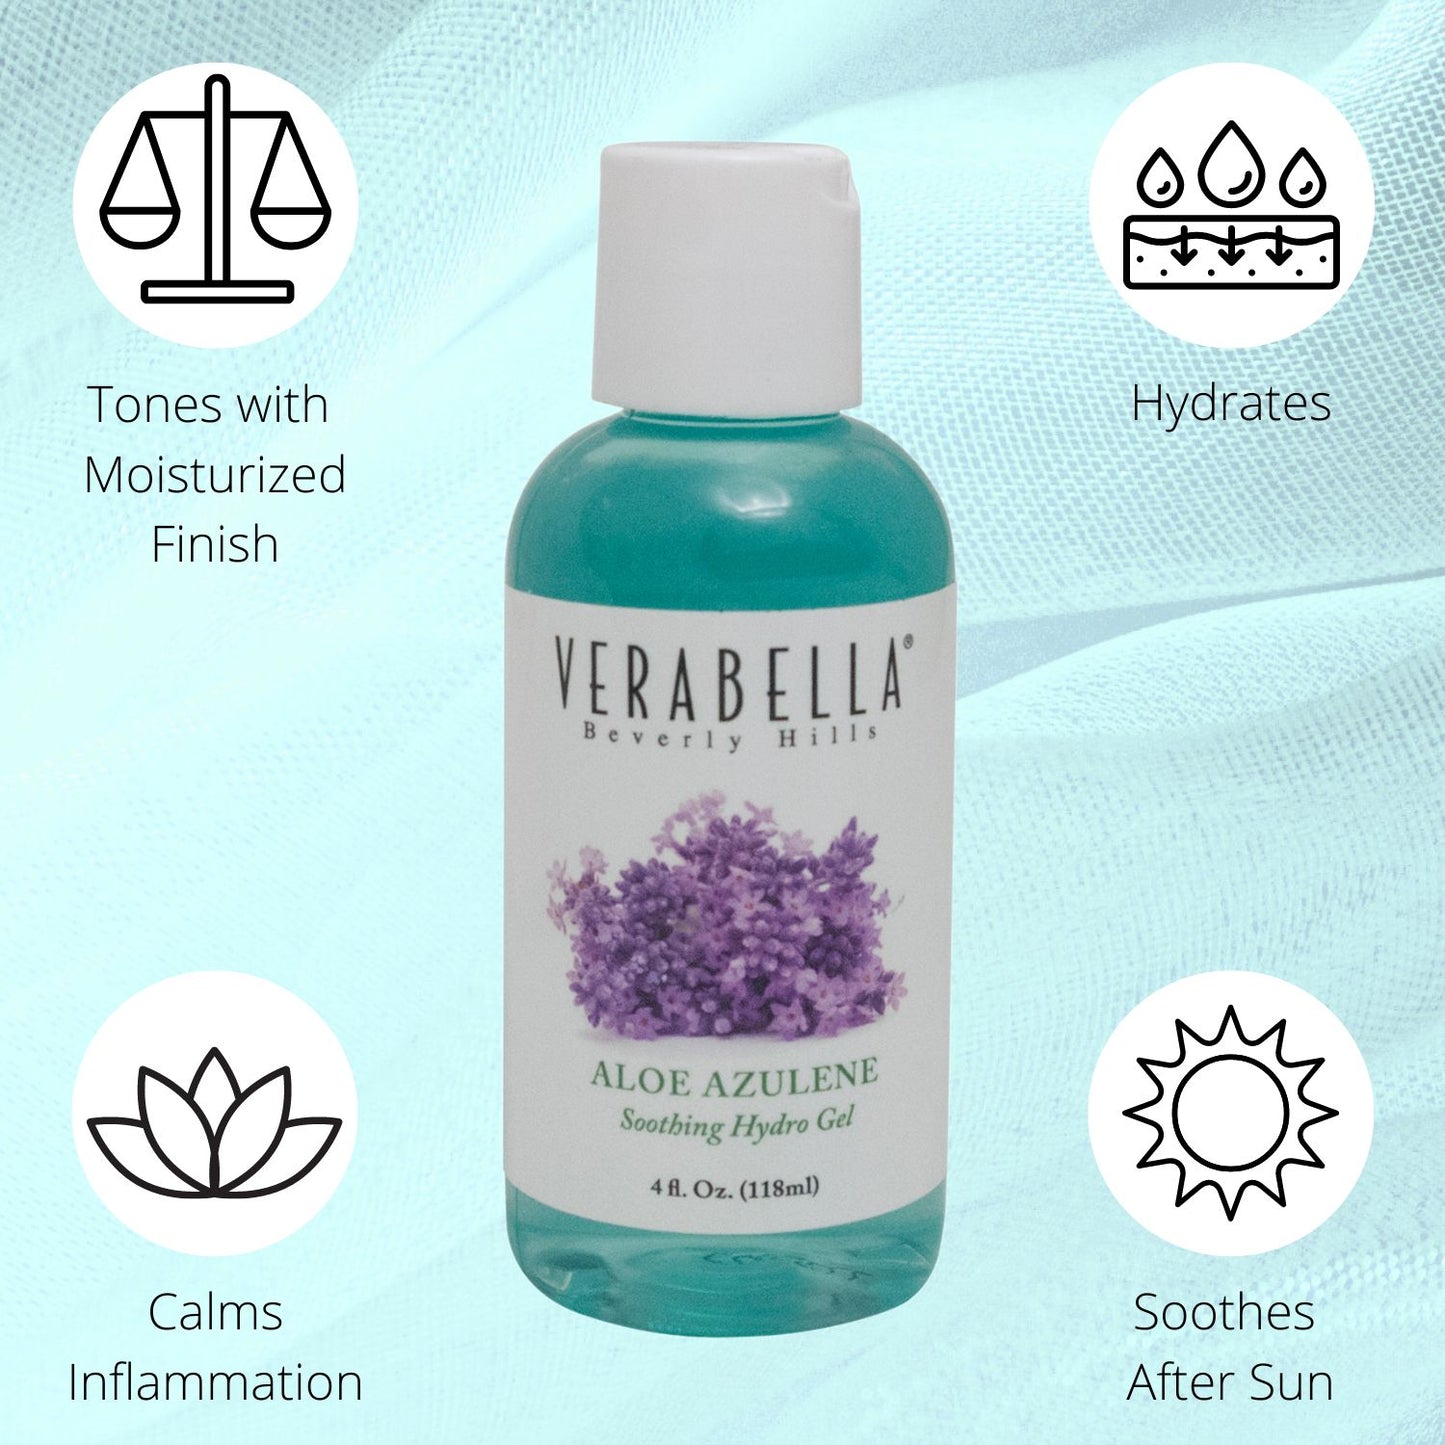 Verabella Aloe Azulene Soothing Hydro Gel calms and soothes with a moisturized finish